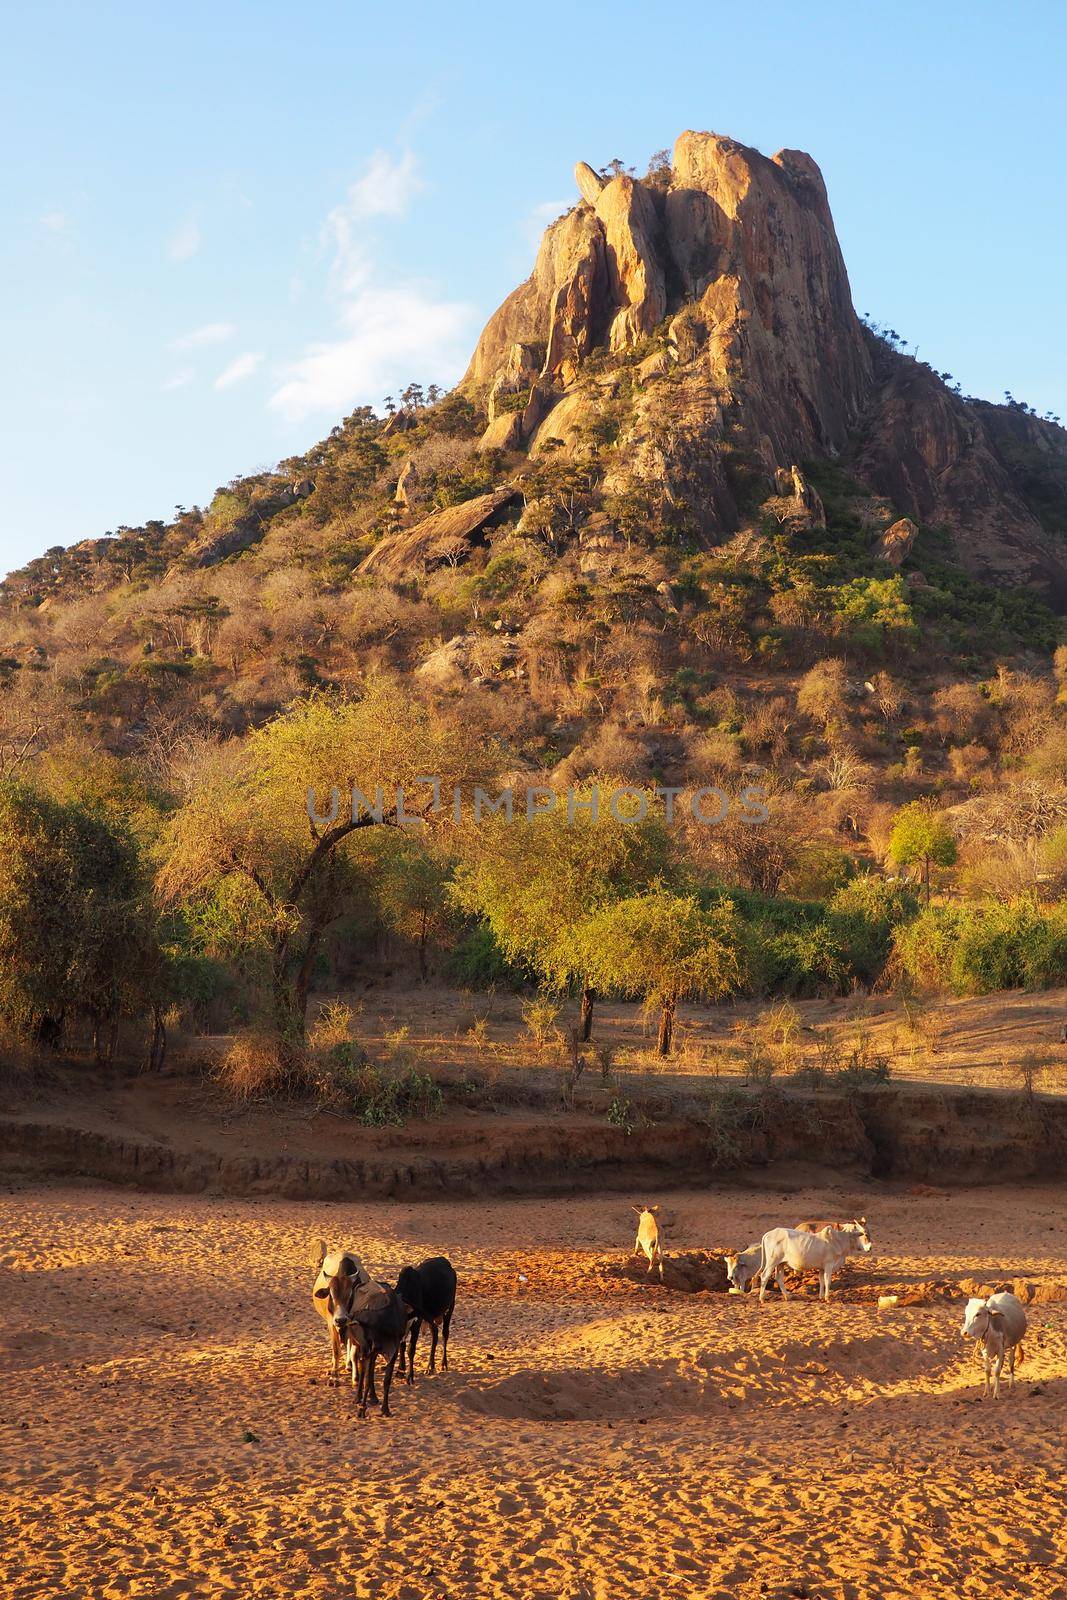 Cows drinking from a dry river bed in African landscape